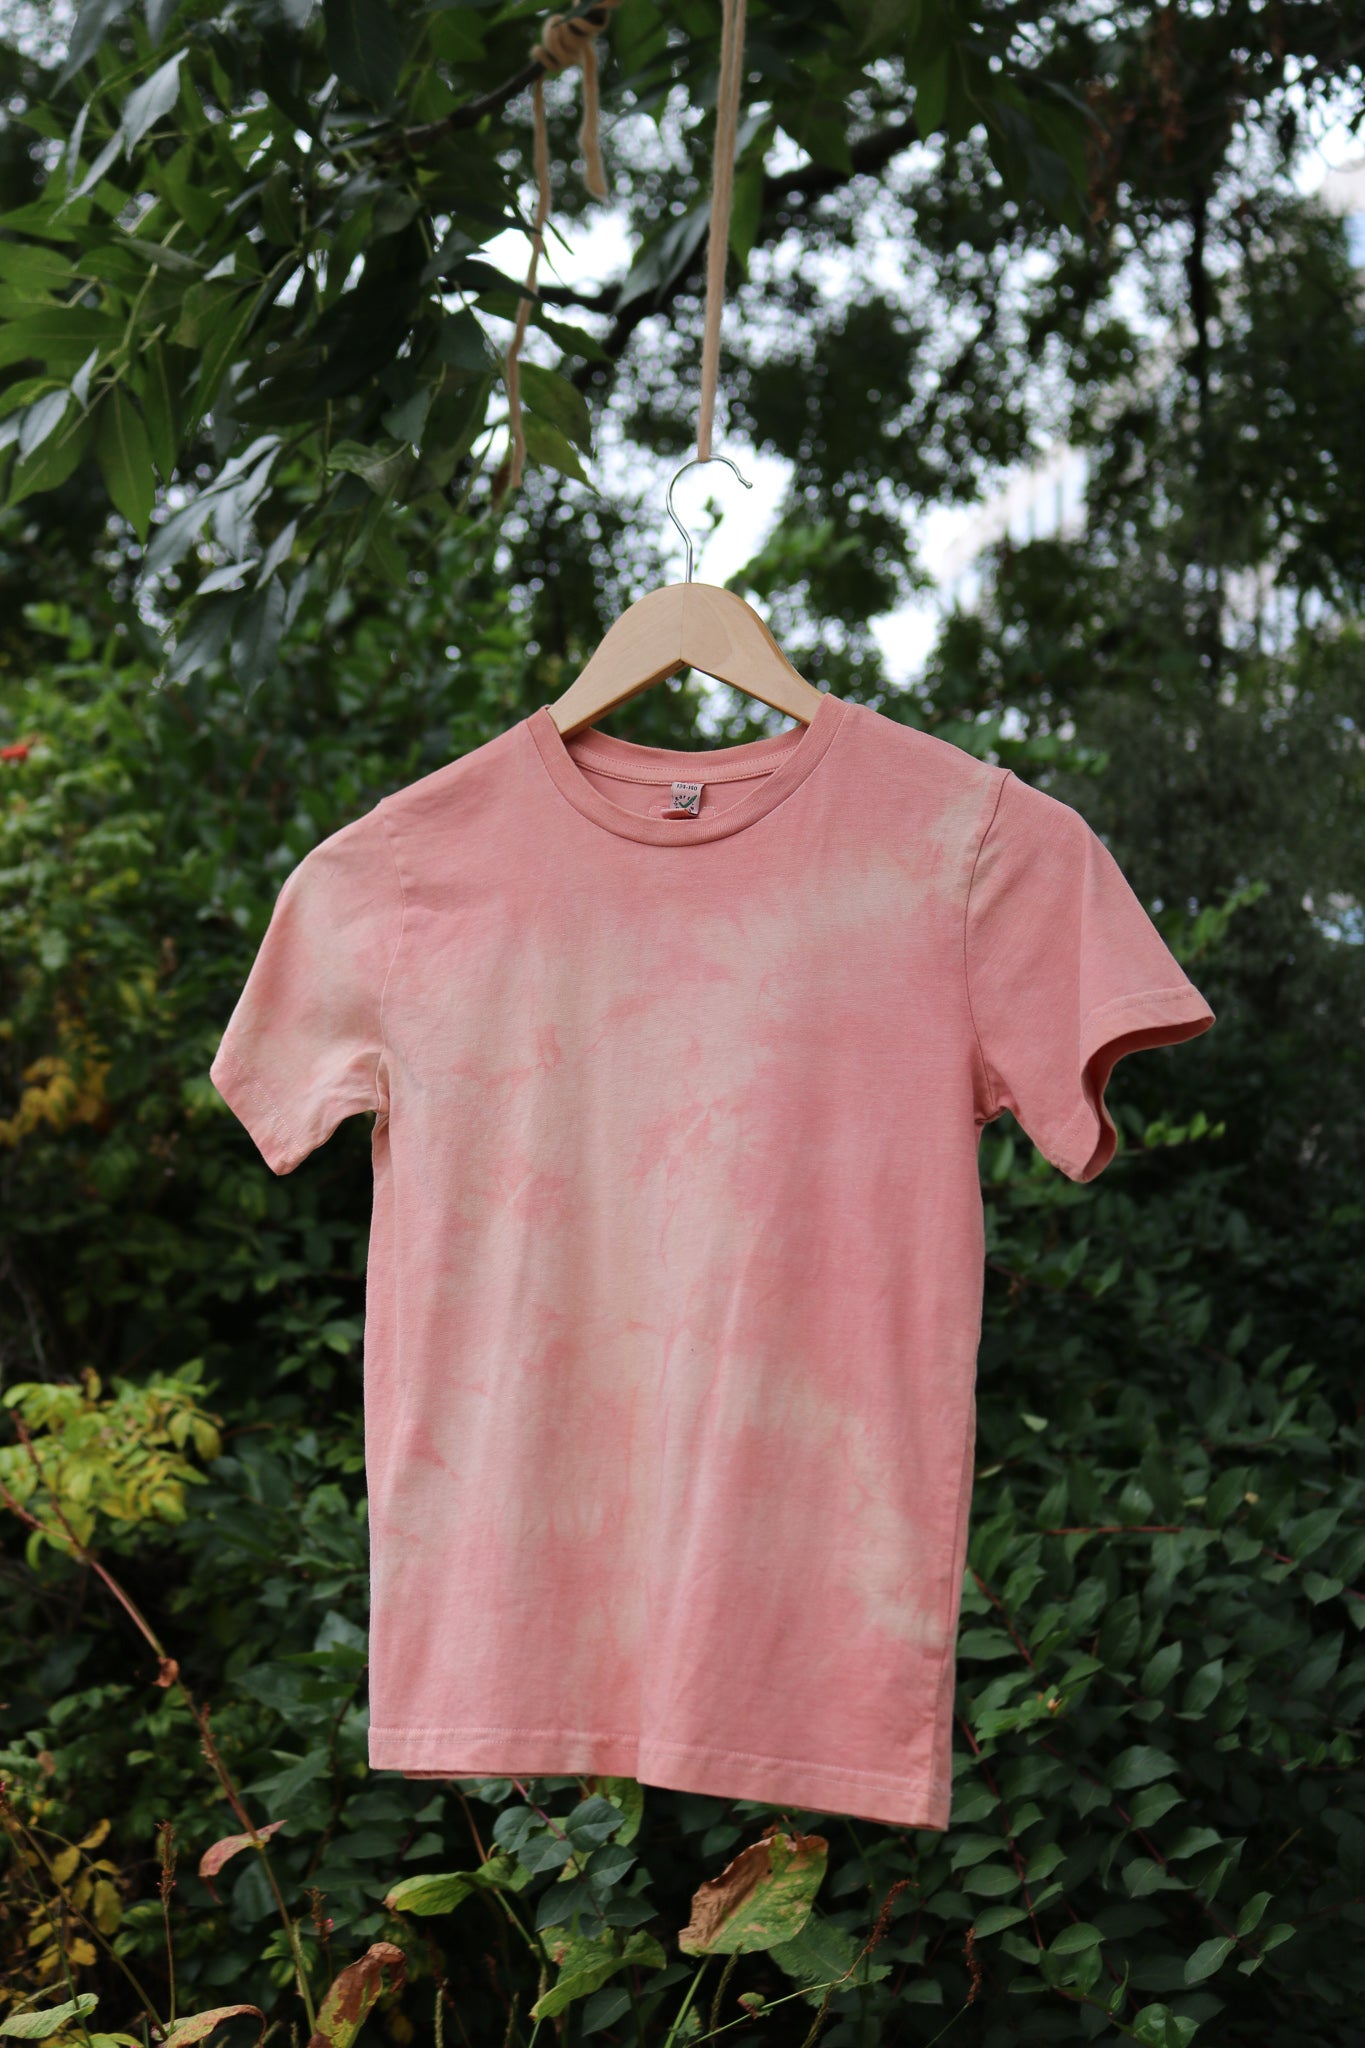 F I V E S cutch and madder tie dyed short sleeve t-shirt